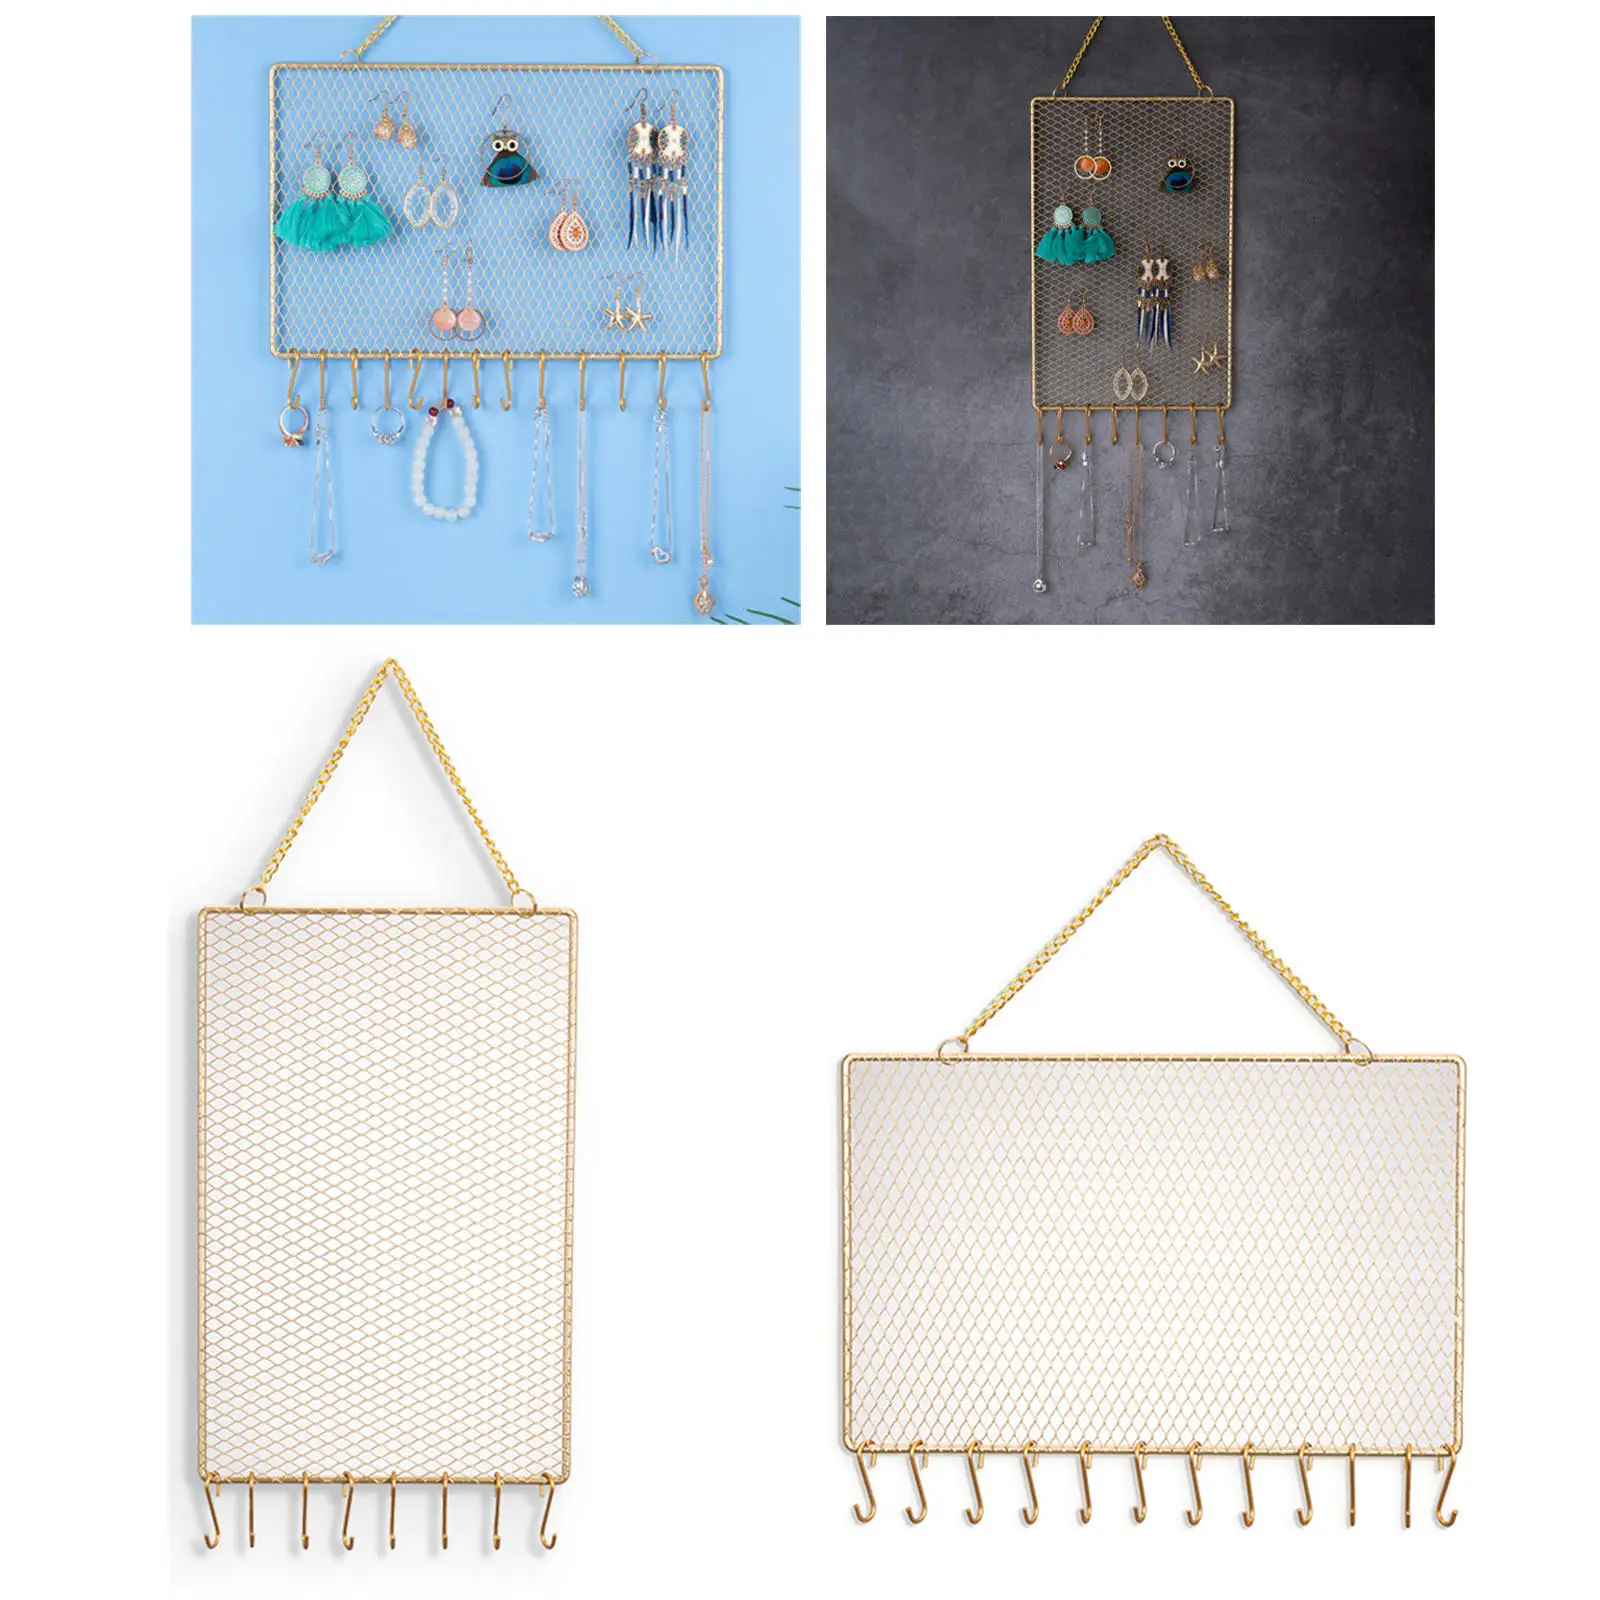 Display Screen Rectangle Rectangle Grid Decorative Storage Necklace Diamond Earring Metal Jewelry Organizer Holder Wall